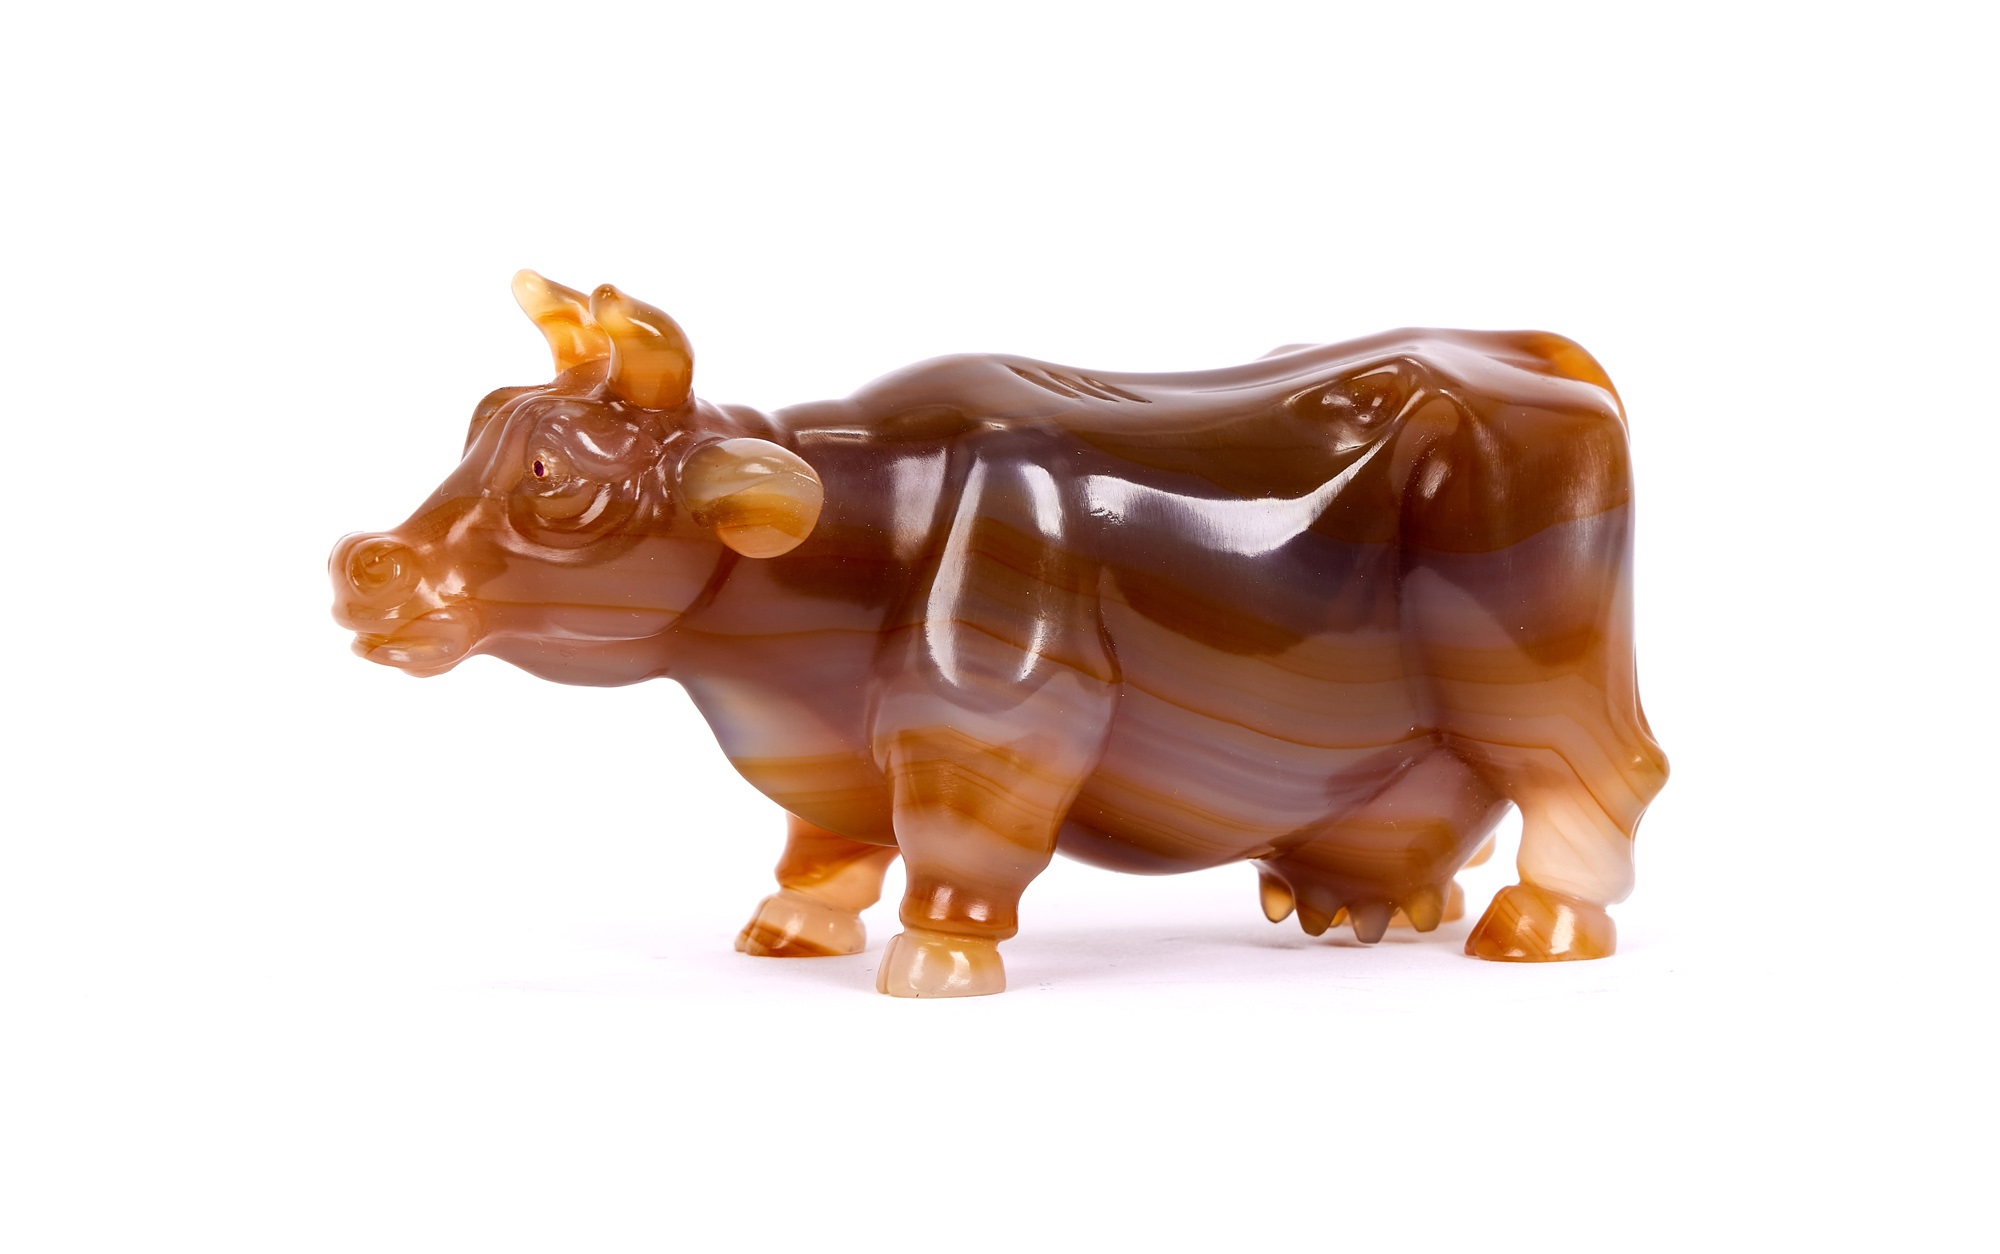 A FABERGE STYLE CARVED HARDSTONE MODEL OF A COW - Image 2 of 3